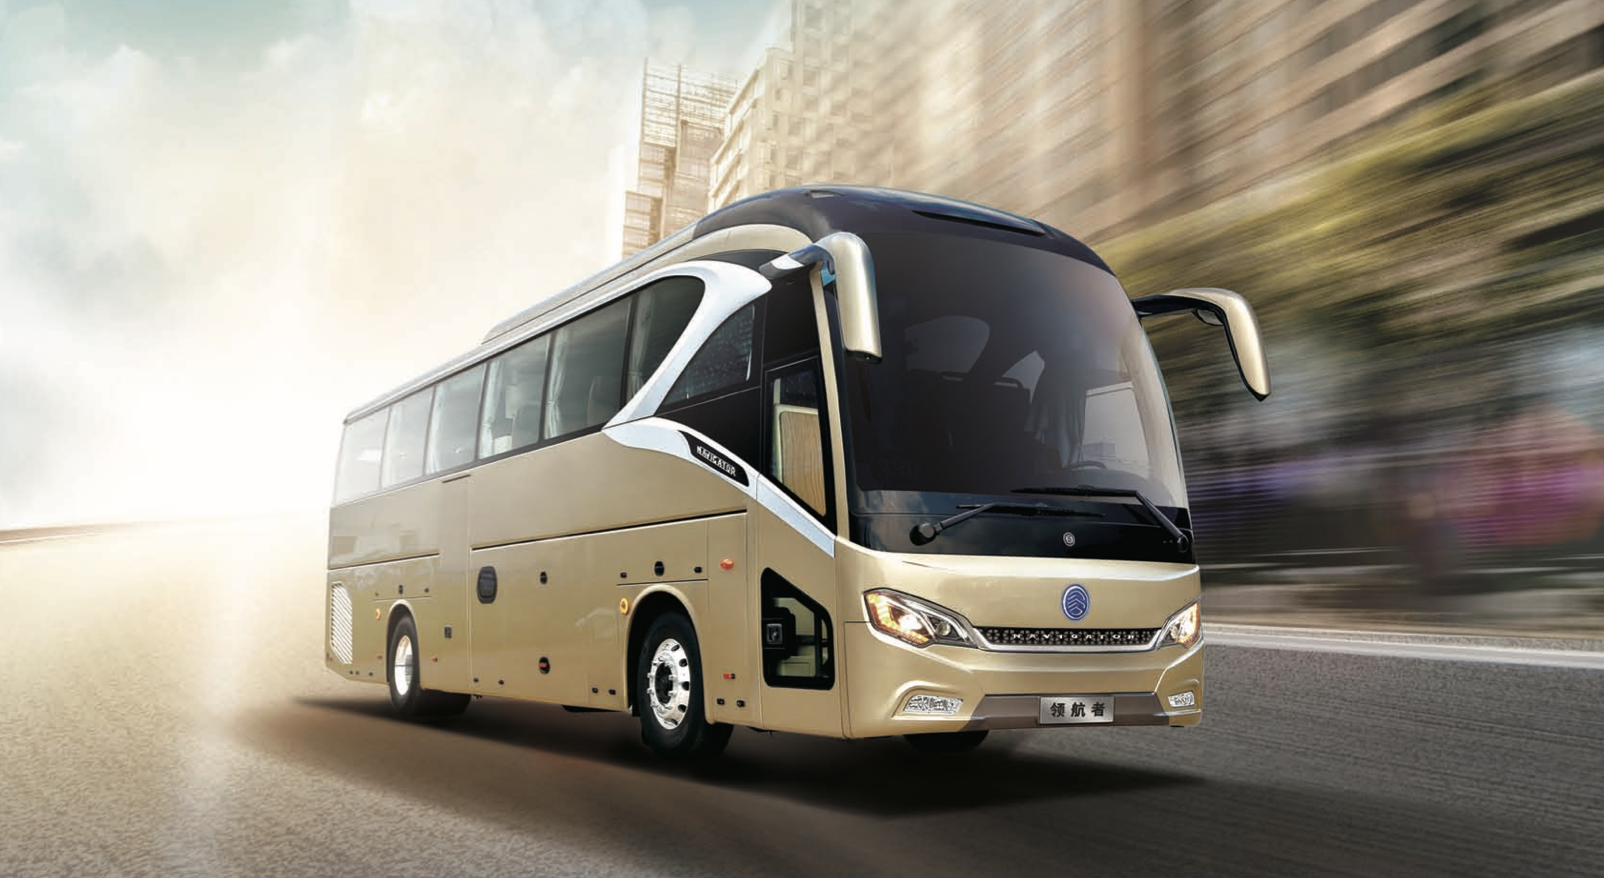 Simba Bhora are reportedly considering purchasing a Navigator bus (a 55-seater with a 12-meter high floor) suitable for long trips.